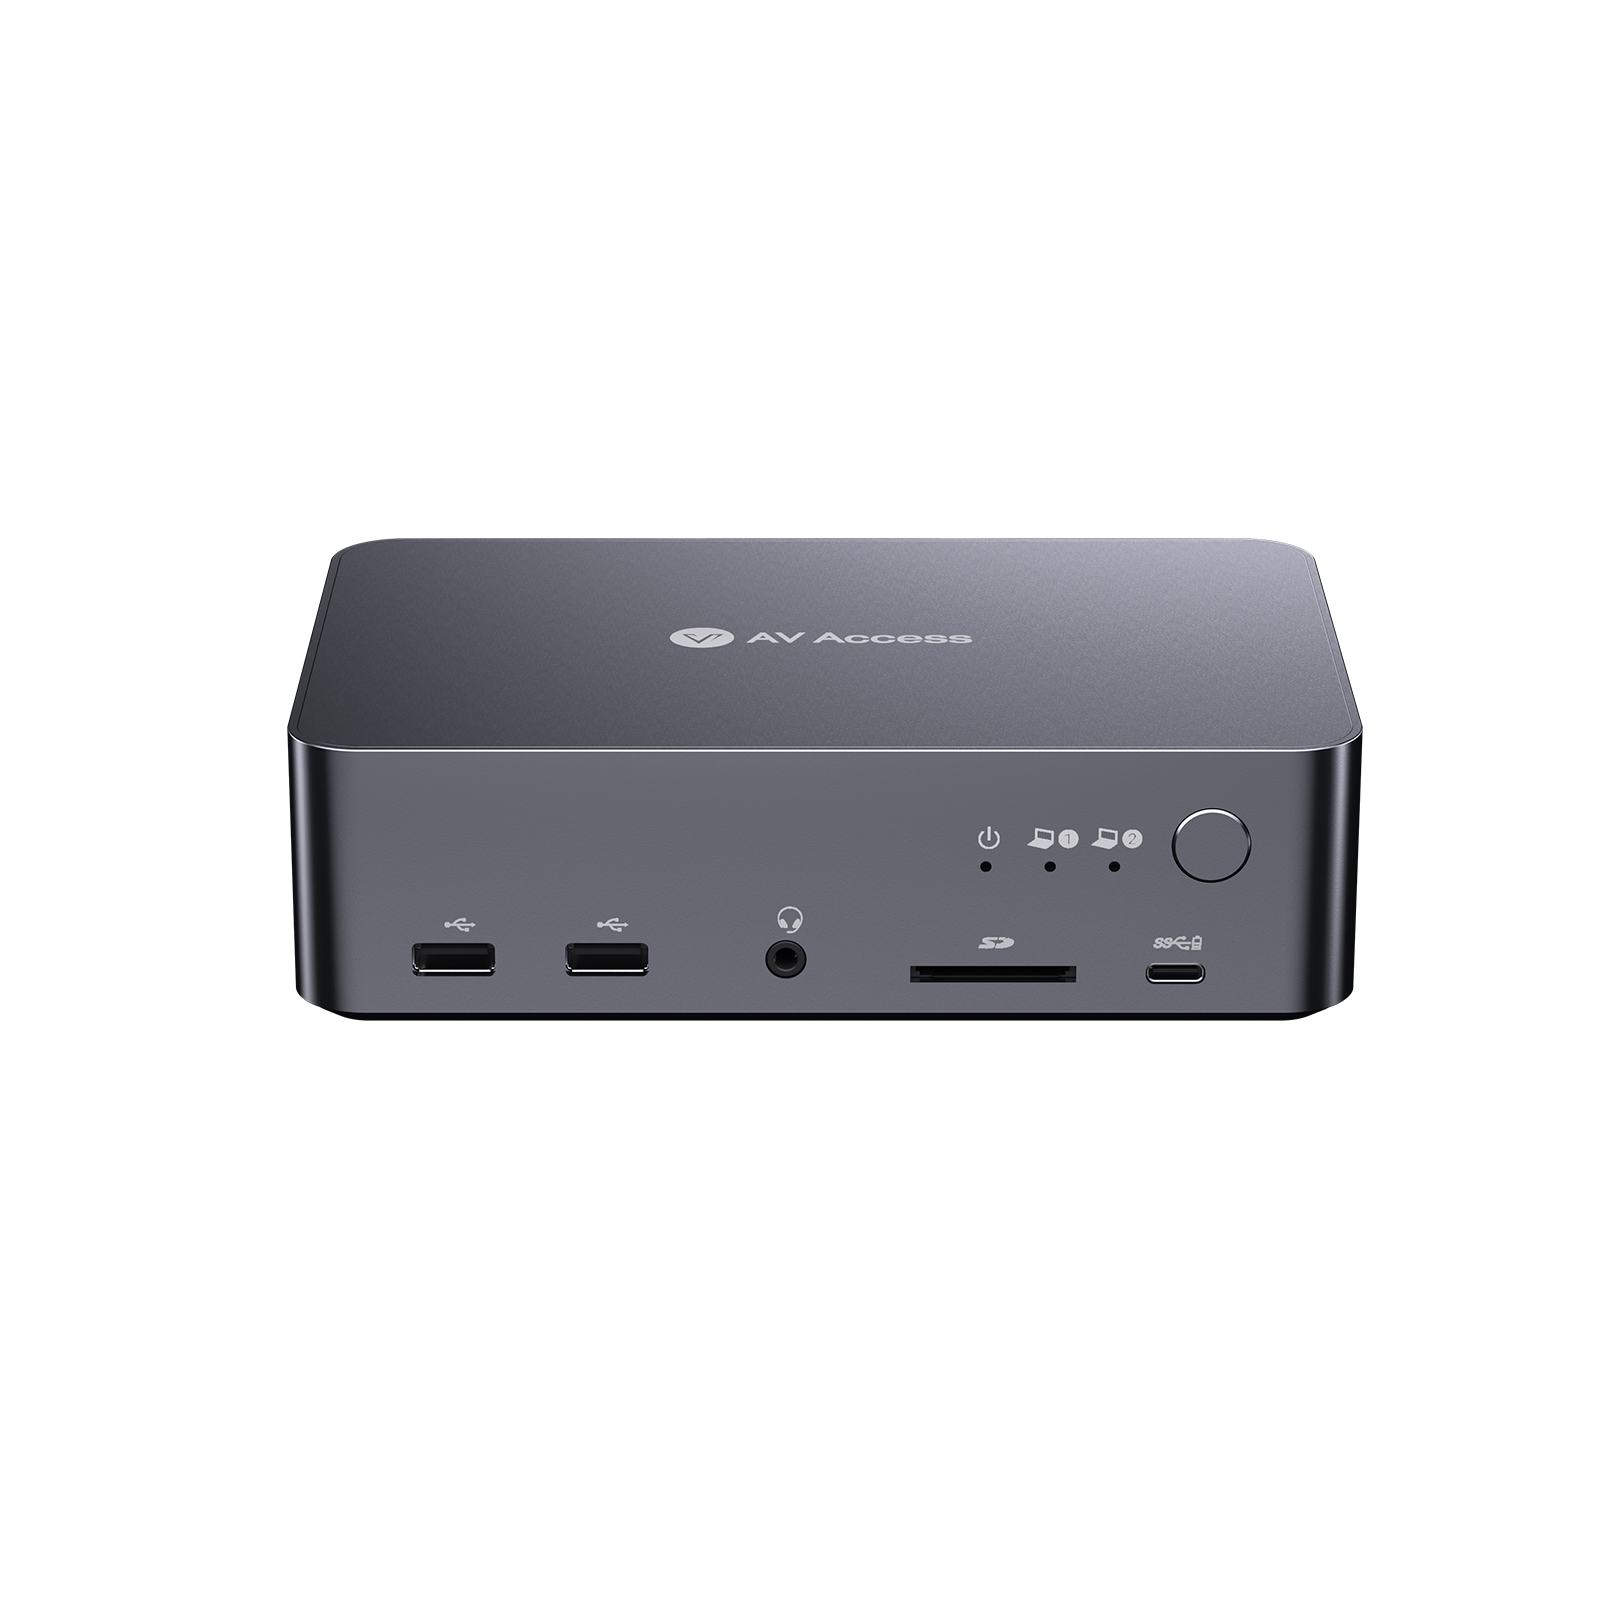 AV Access Introduces iDock C20: The Ultimate USB-C KVM Switch Docking Station for Seamless Switching between 2 Laptops